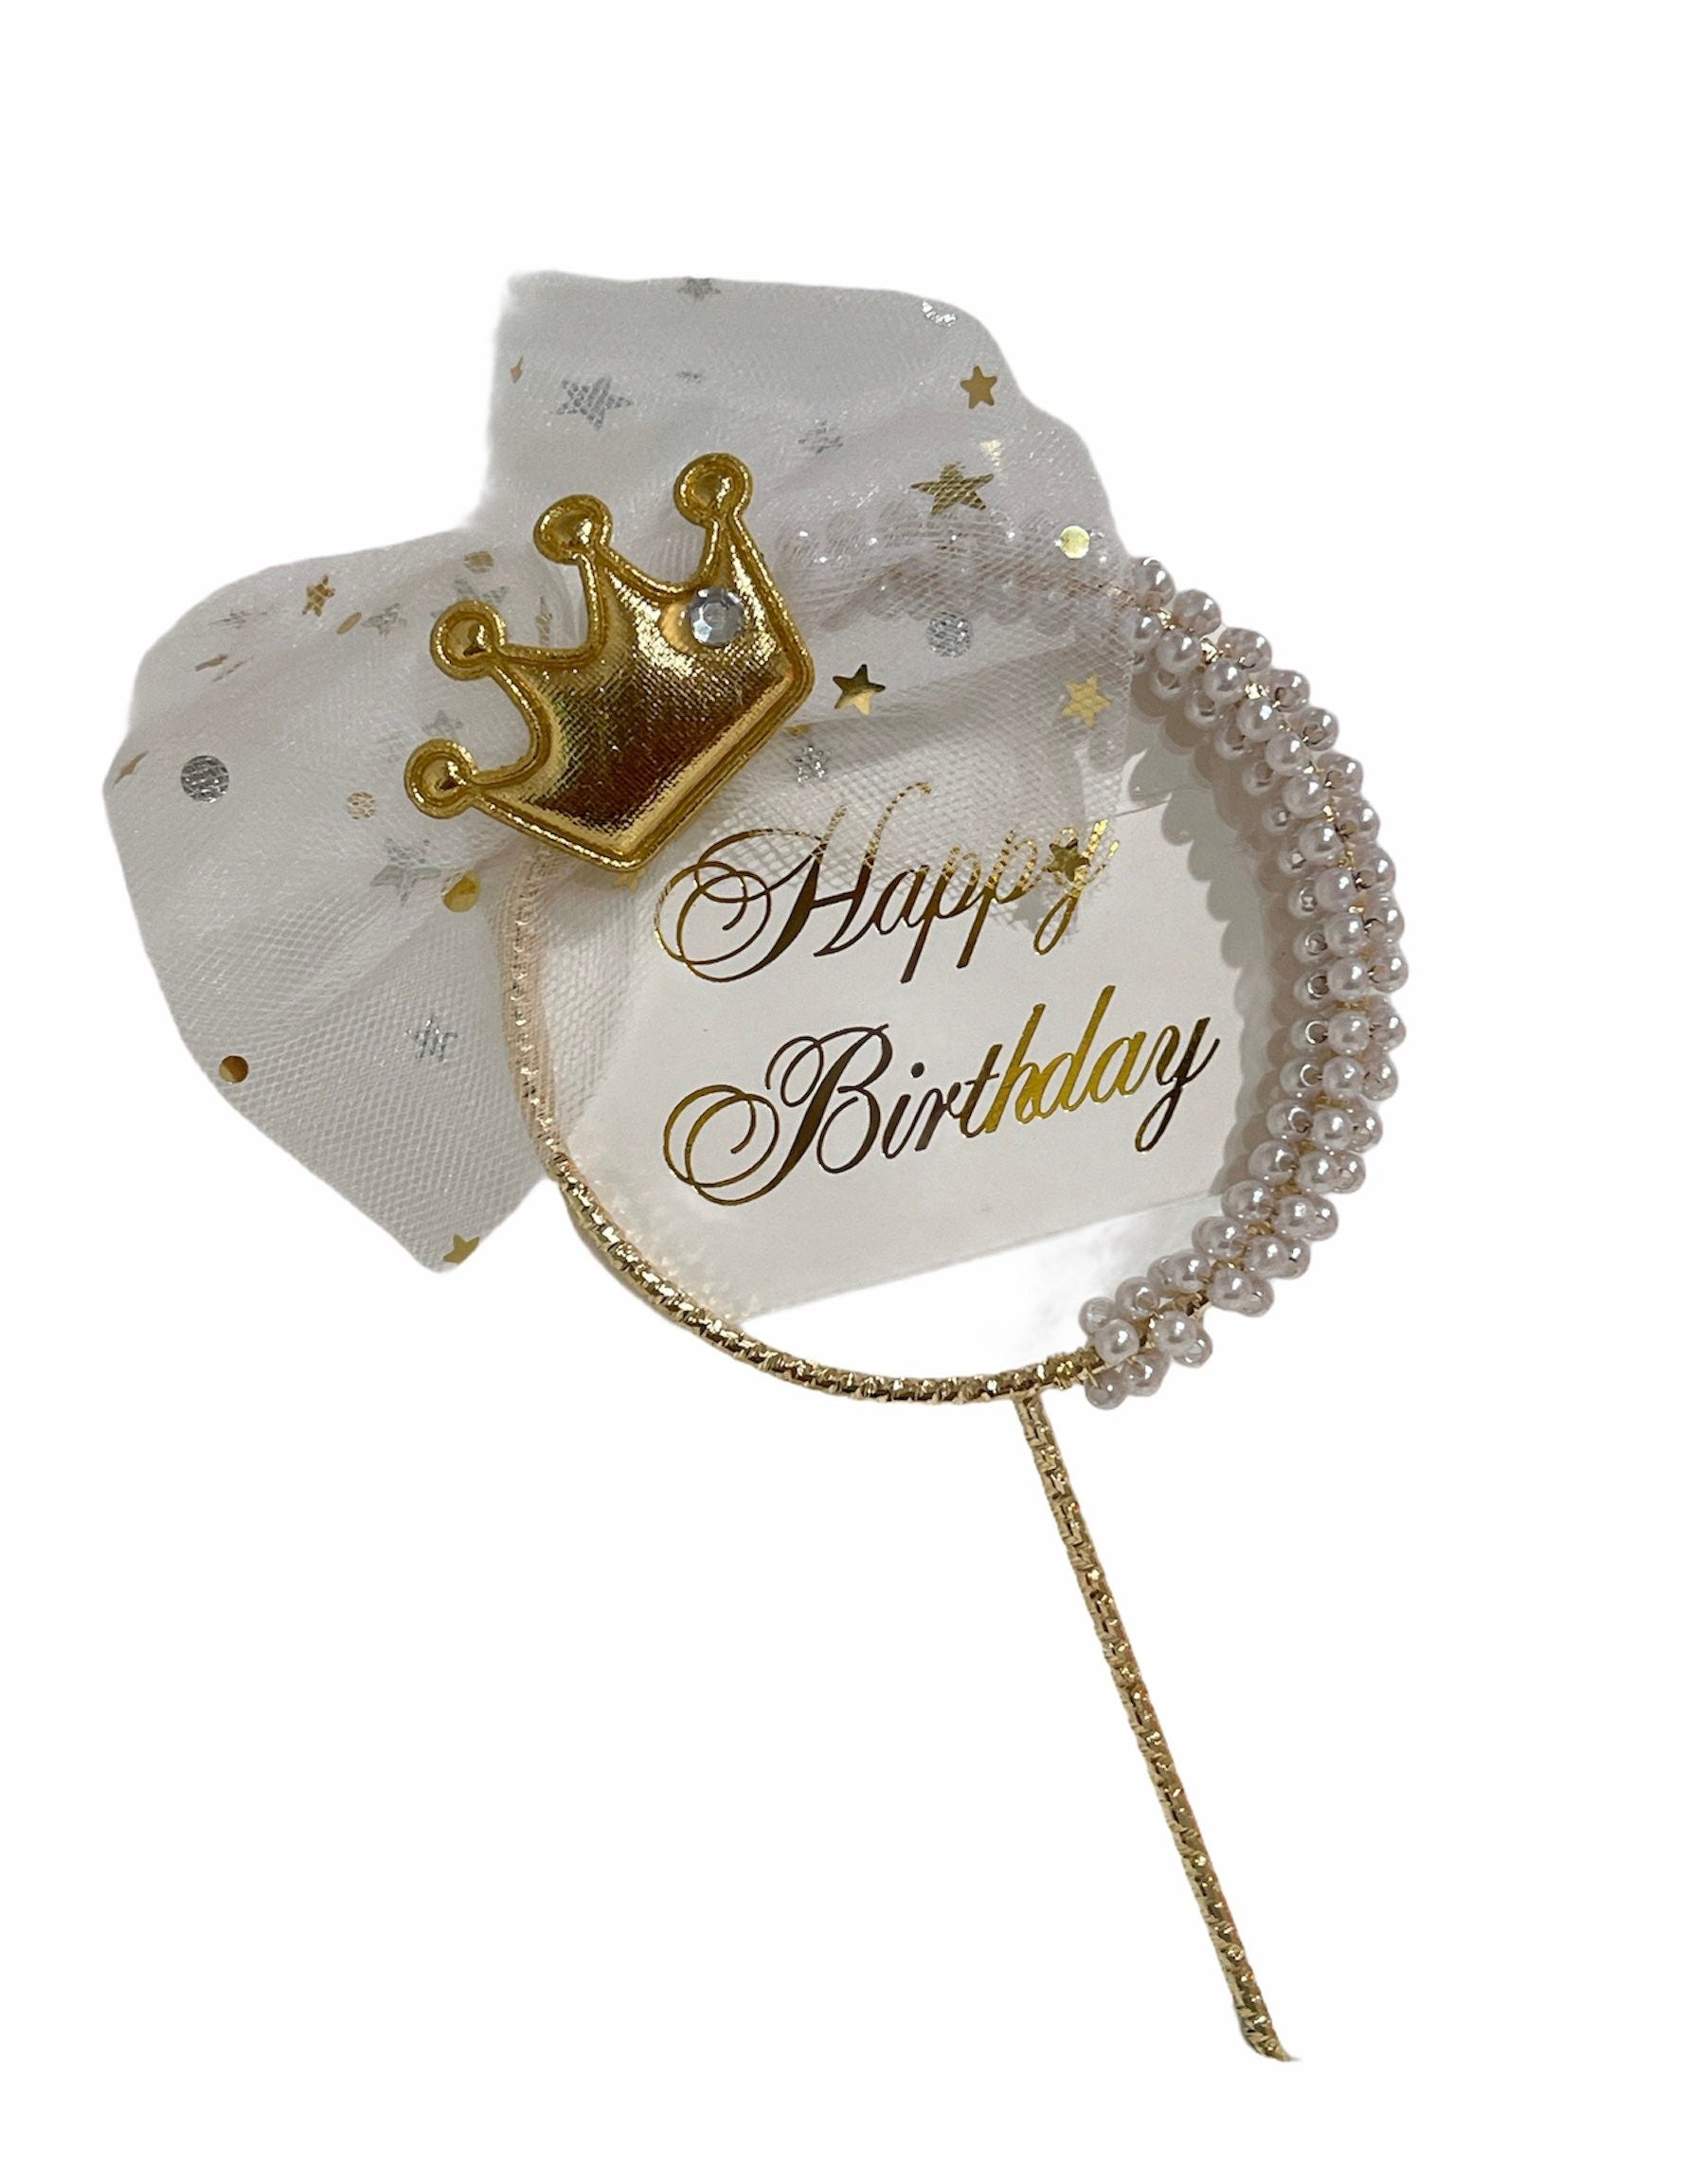 Golden Acrylic Cake Topper Theme Birthday Queen Mom Best Mom Ever And  Superdad BIrthday King Dad 6 Inches Pack of 6 Pcs : Amazon.in: Toys & Games